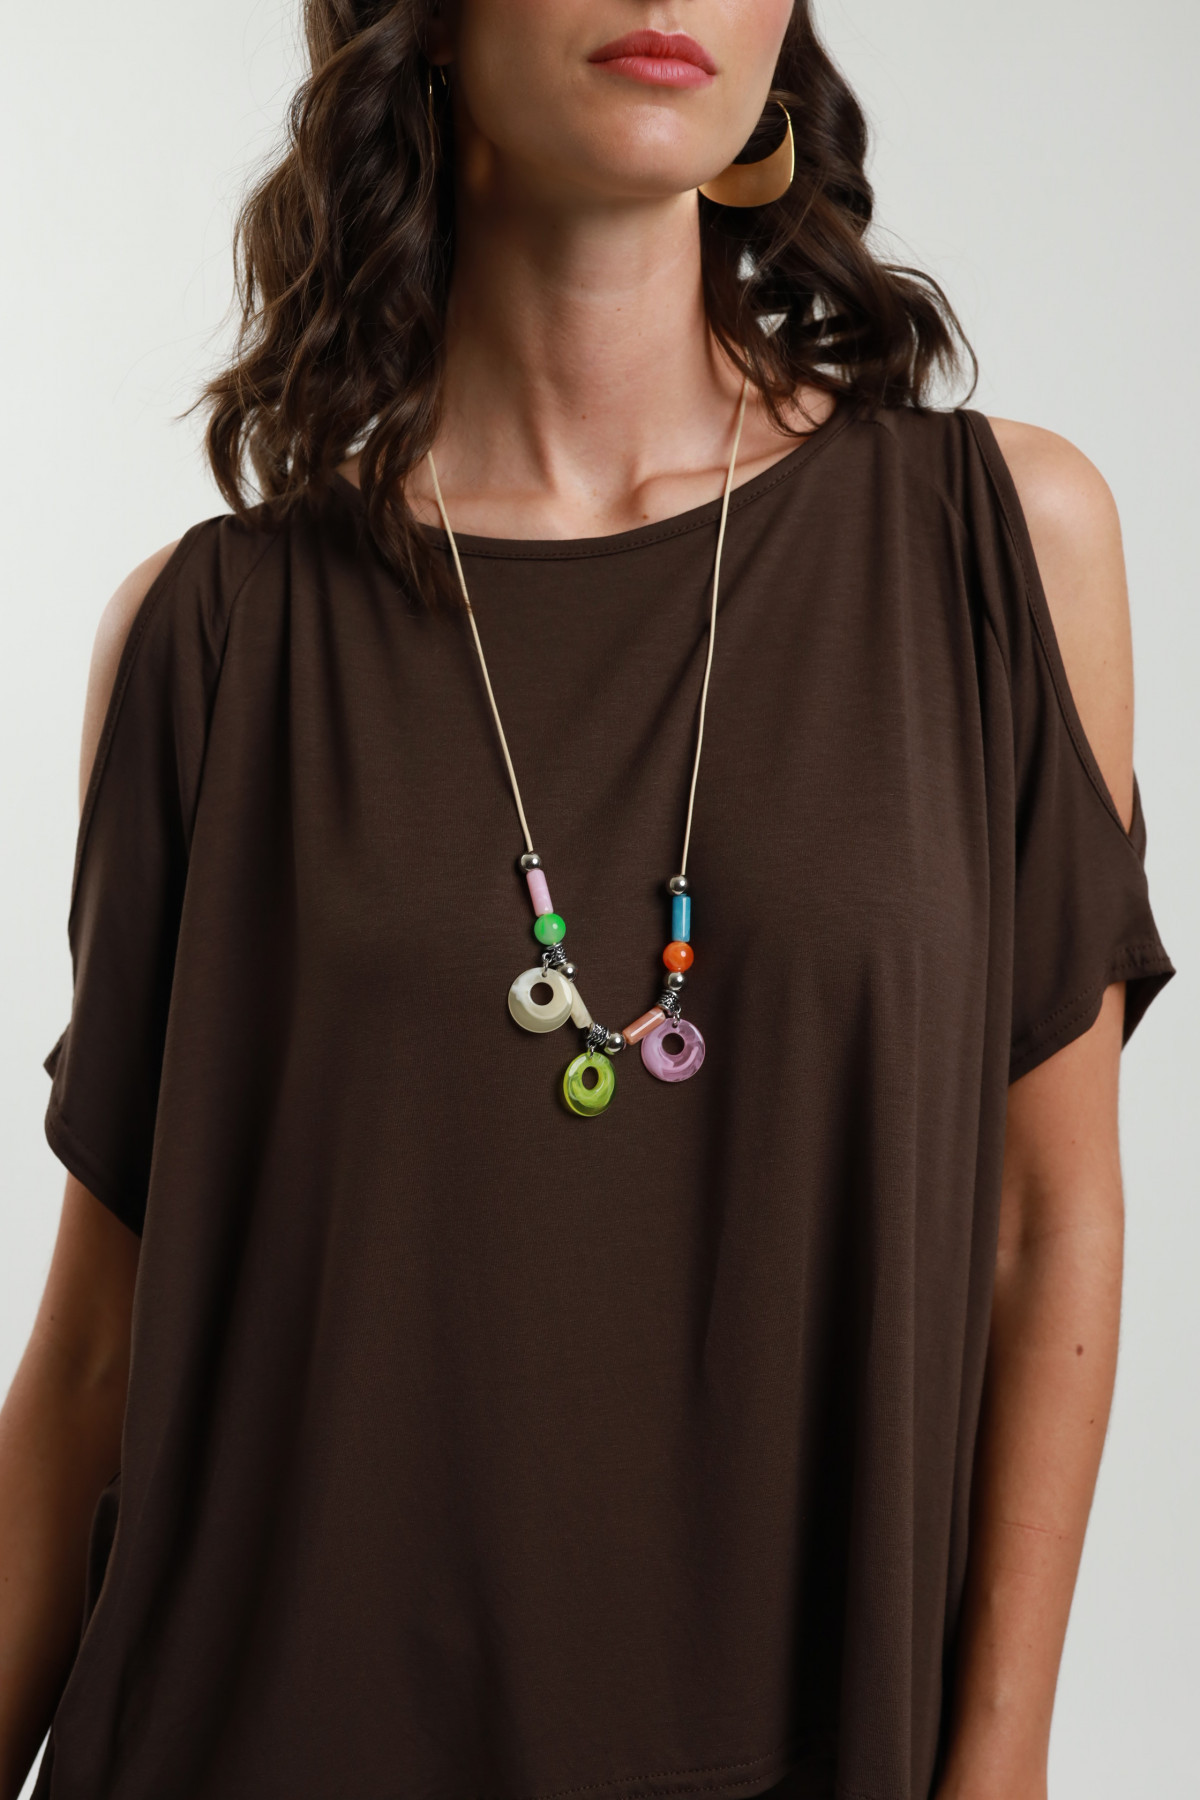 CutOut Shirt and Necklace